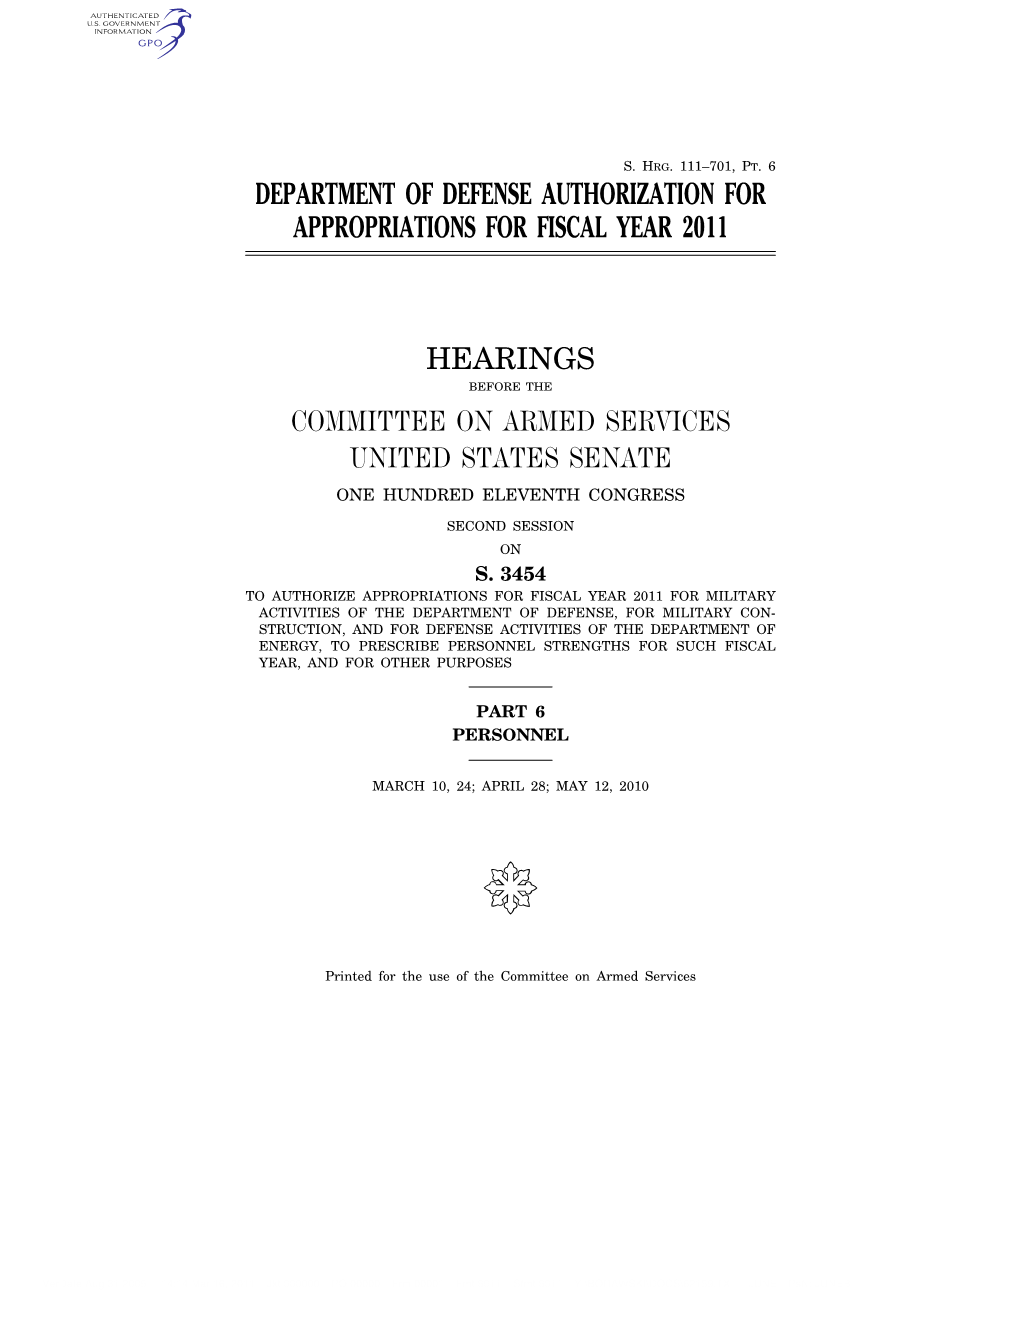 Department of Defense Authorization for Appropriations for Fiscal Year 2011